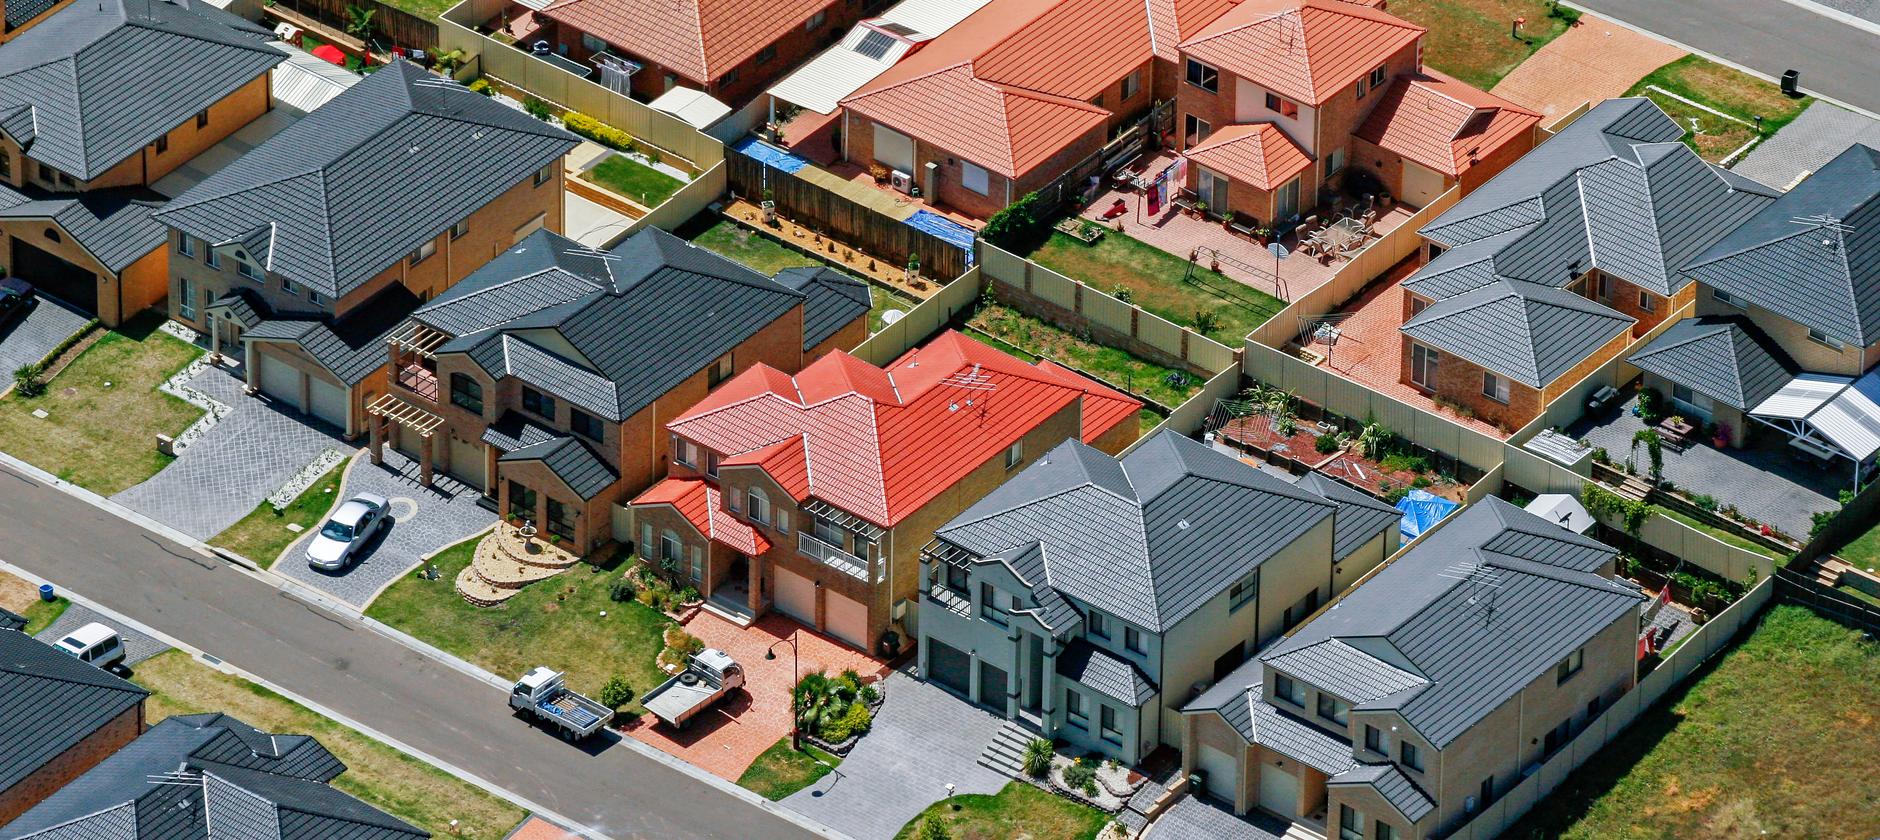 Australia's most mortgaged regions and the impact of 12 rate hikes